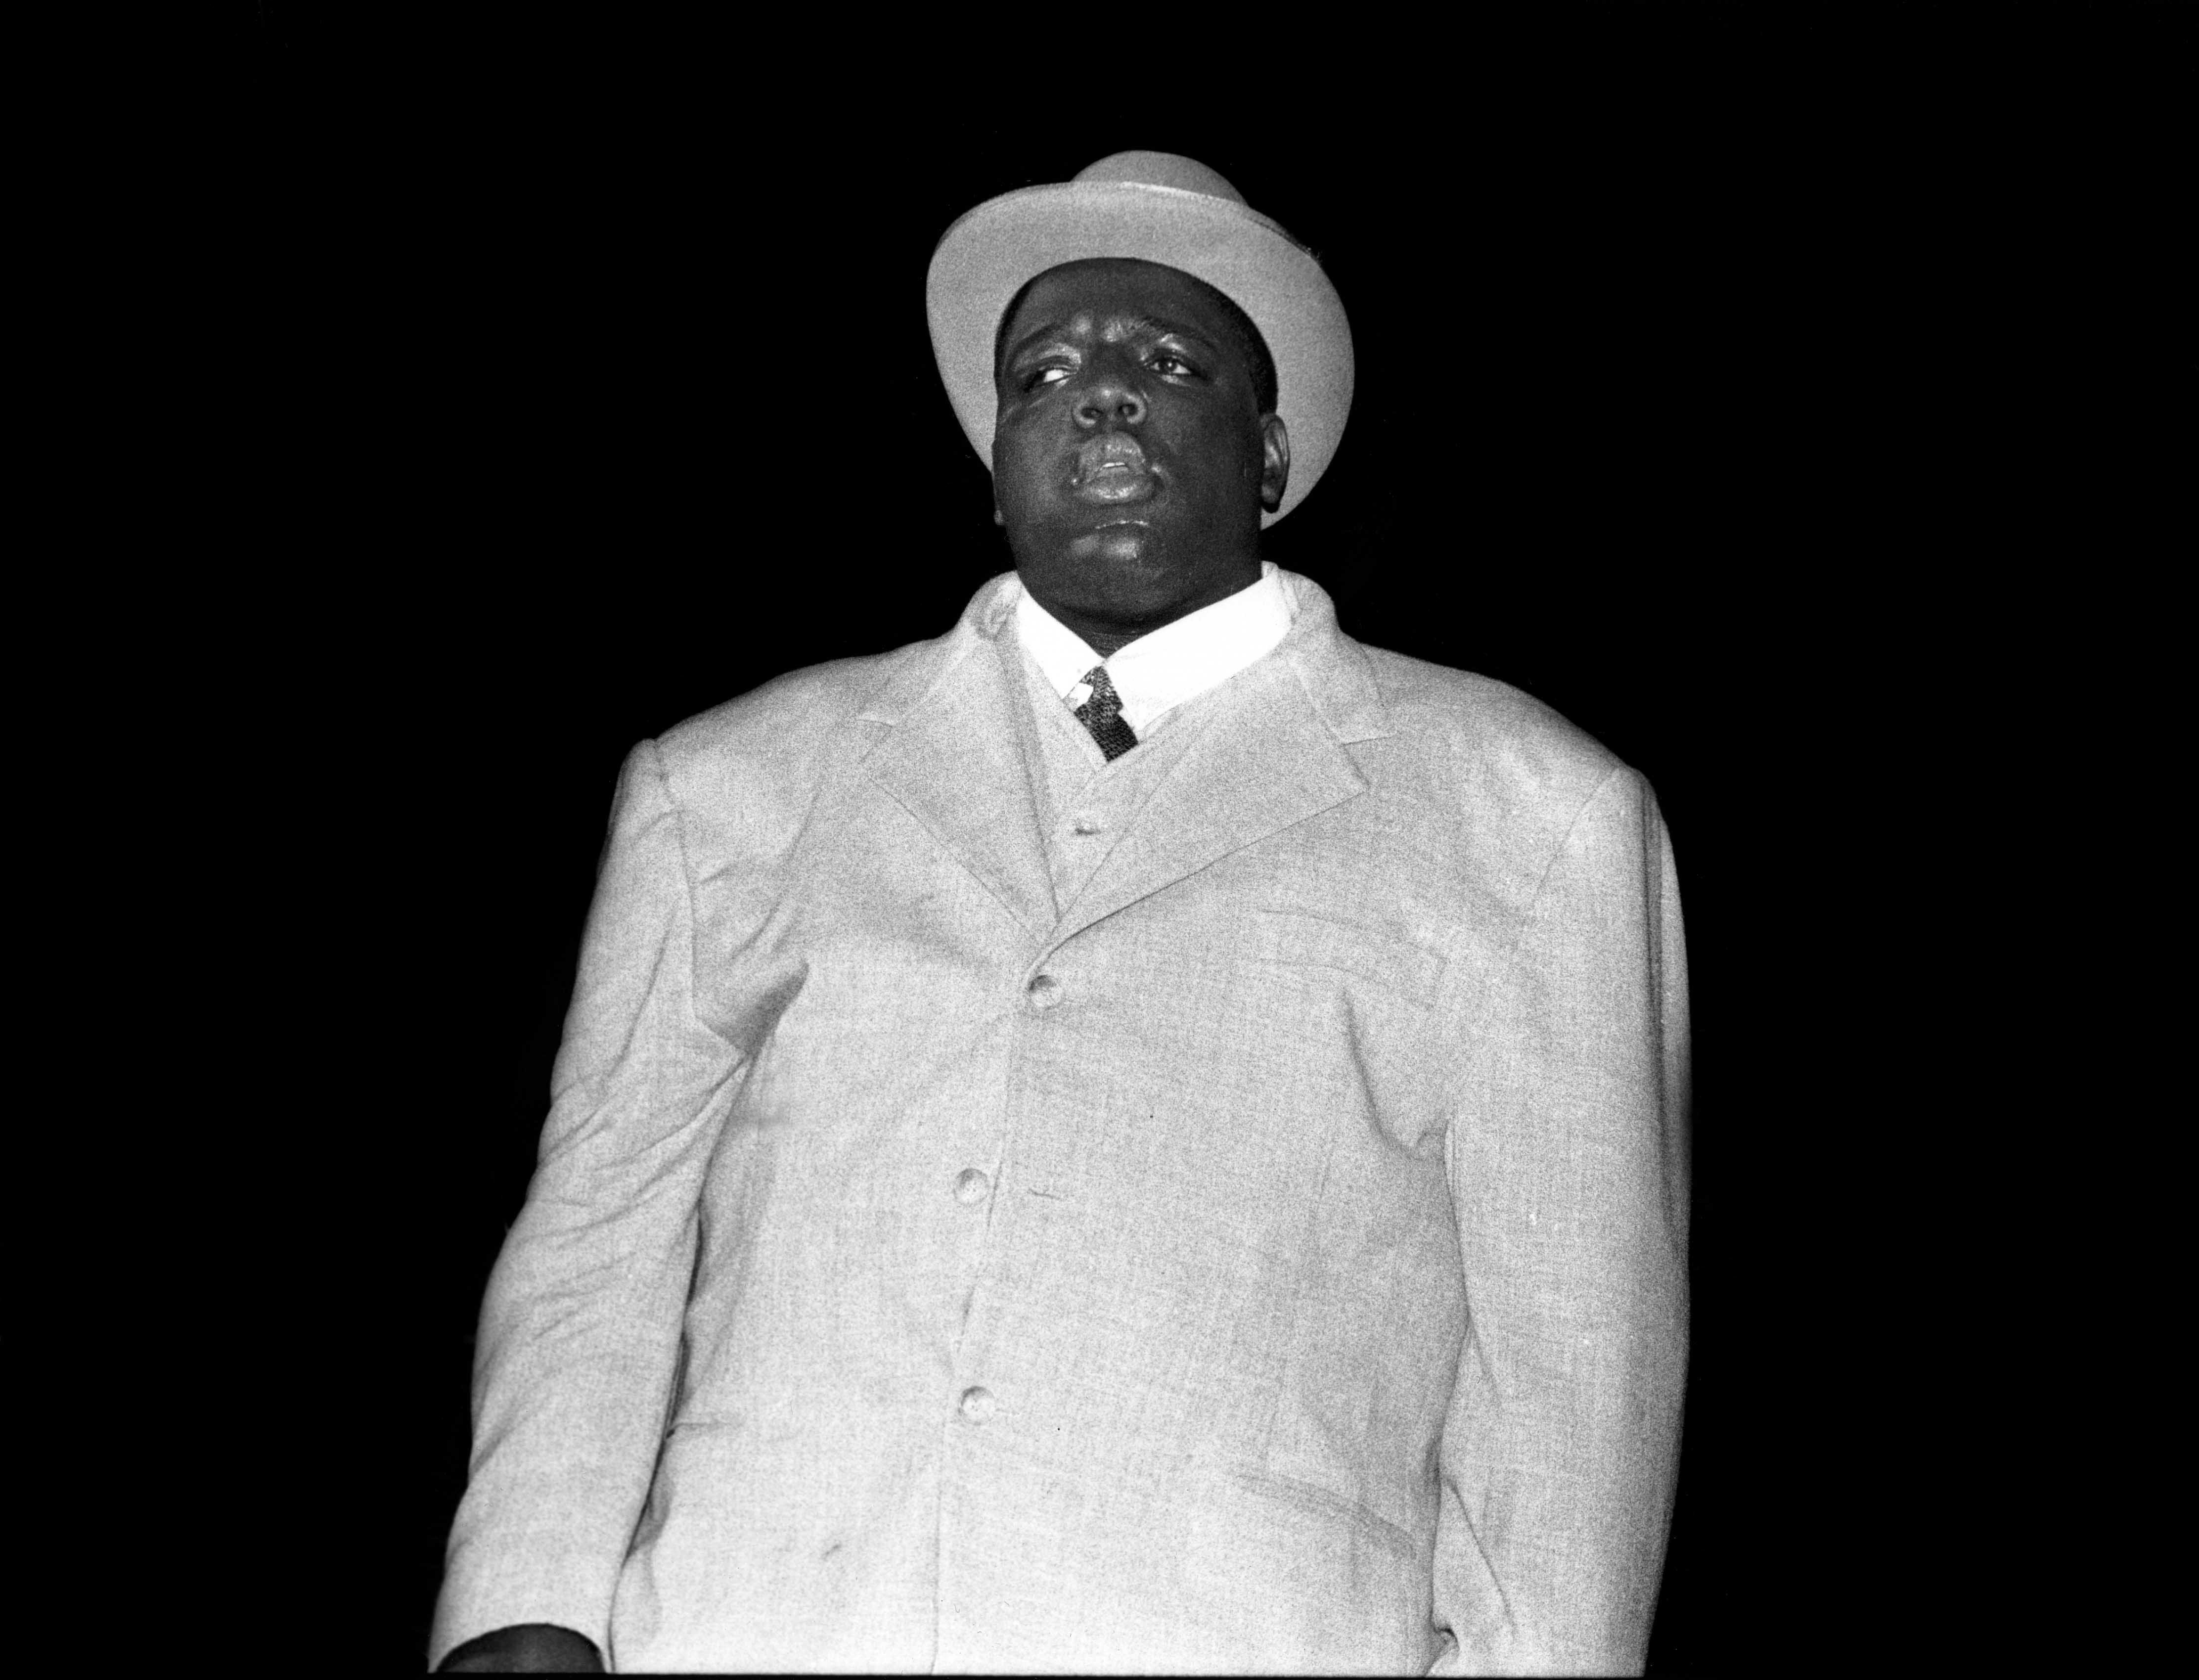 The Notorious B.I.G. wearing a suit and hat